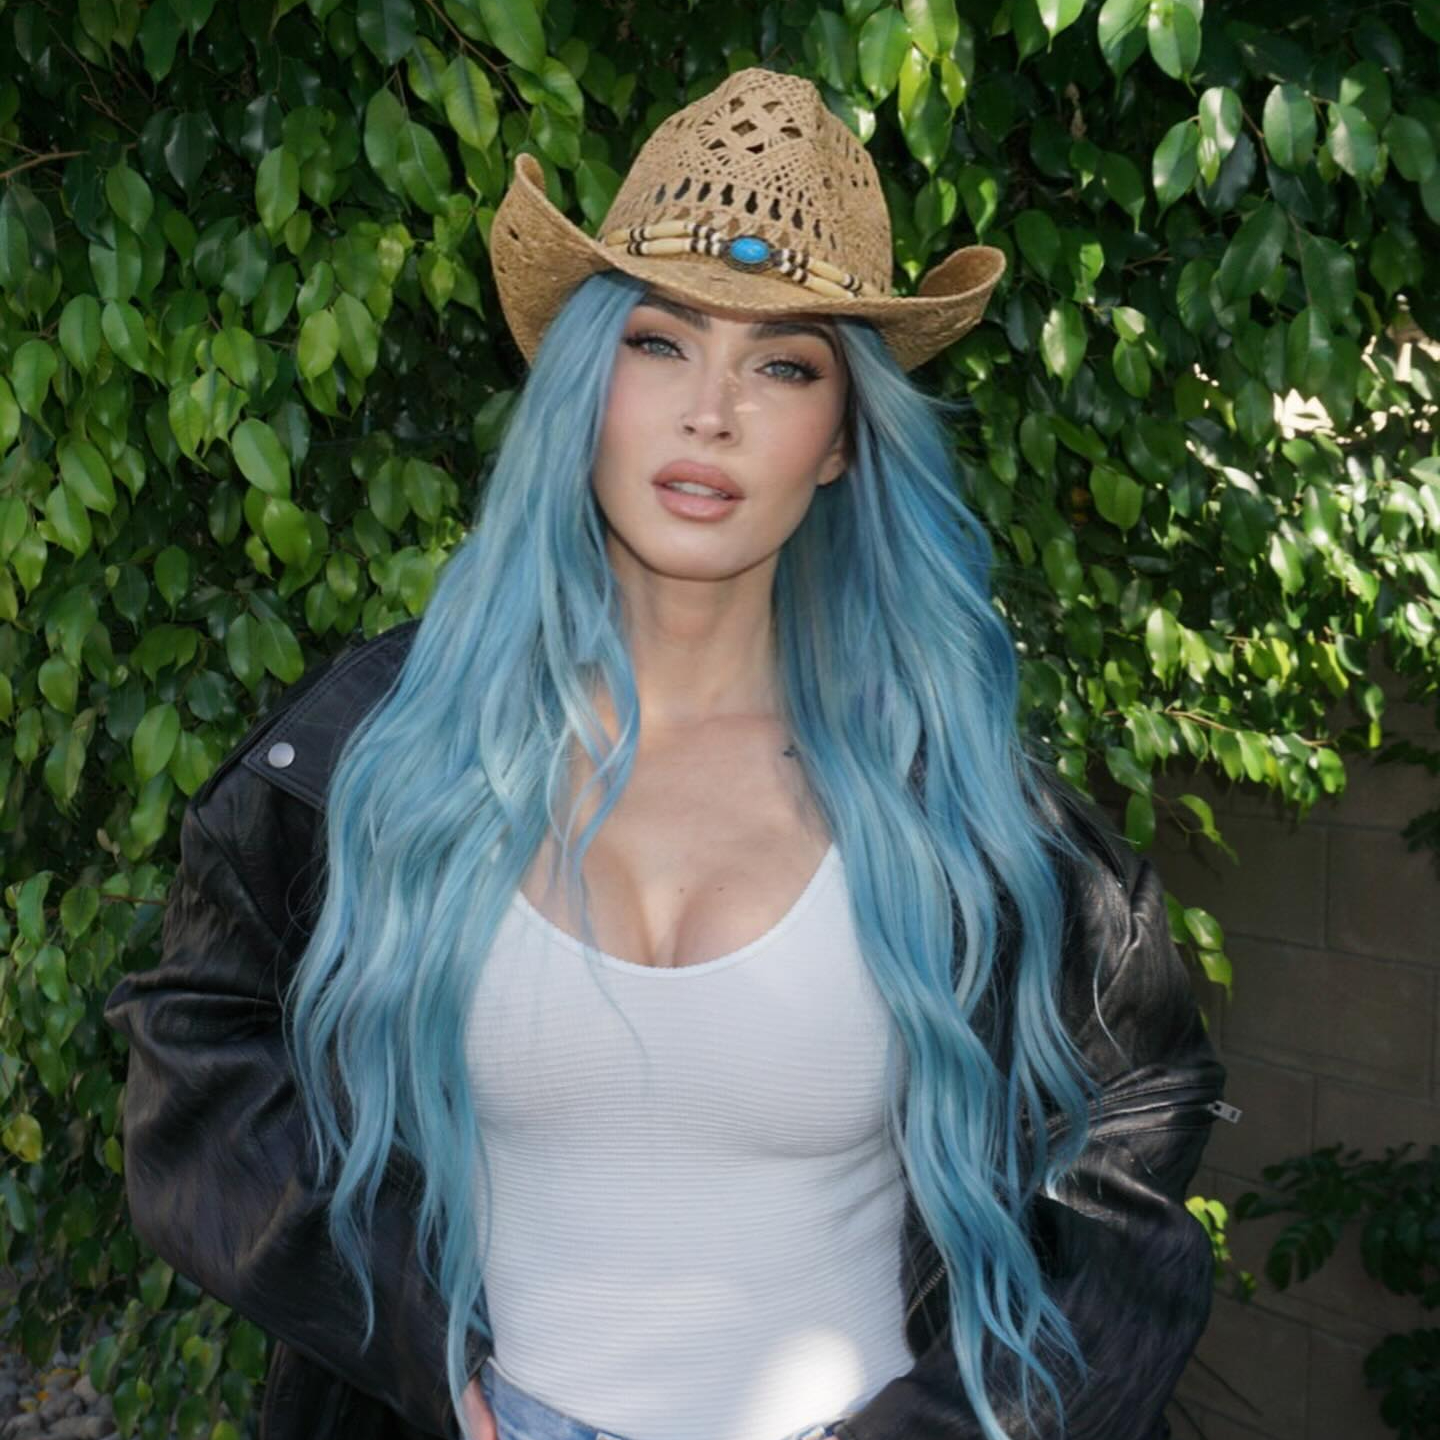 Megan Fox posing for a picture in front of greenery at Coachella wearing a cowboy hat, white tank, and black jacket